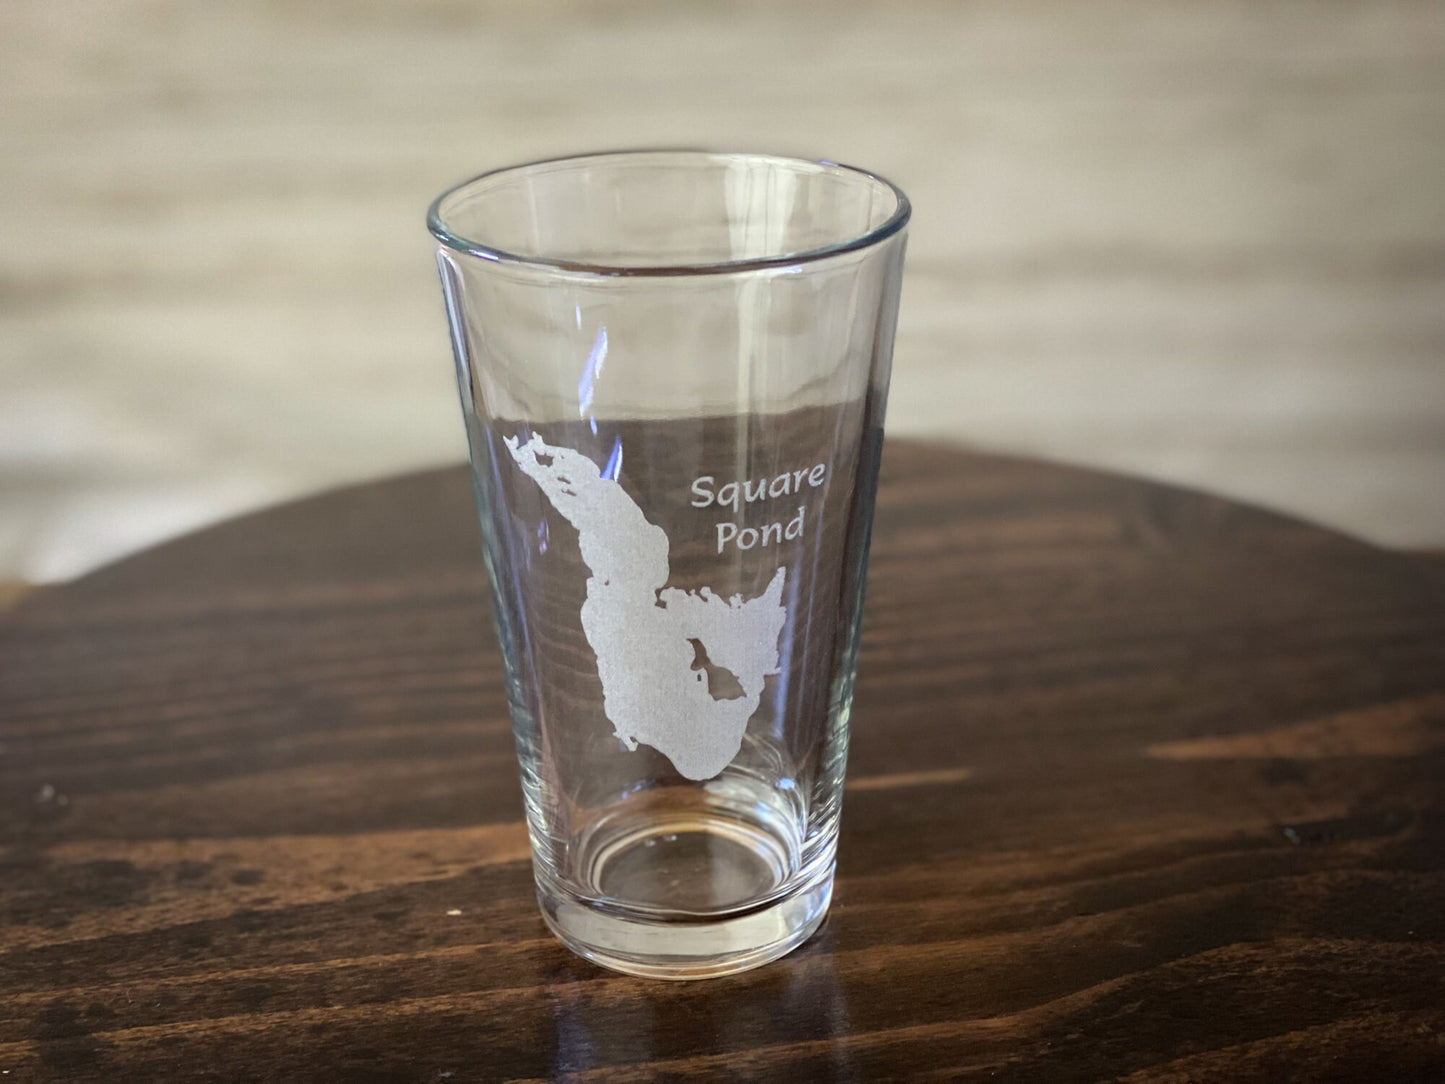 Square Pond Maine Pint Glass - Laser engraved pint glass